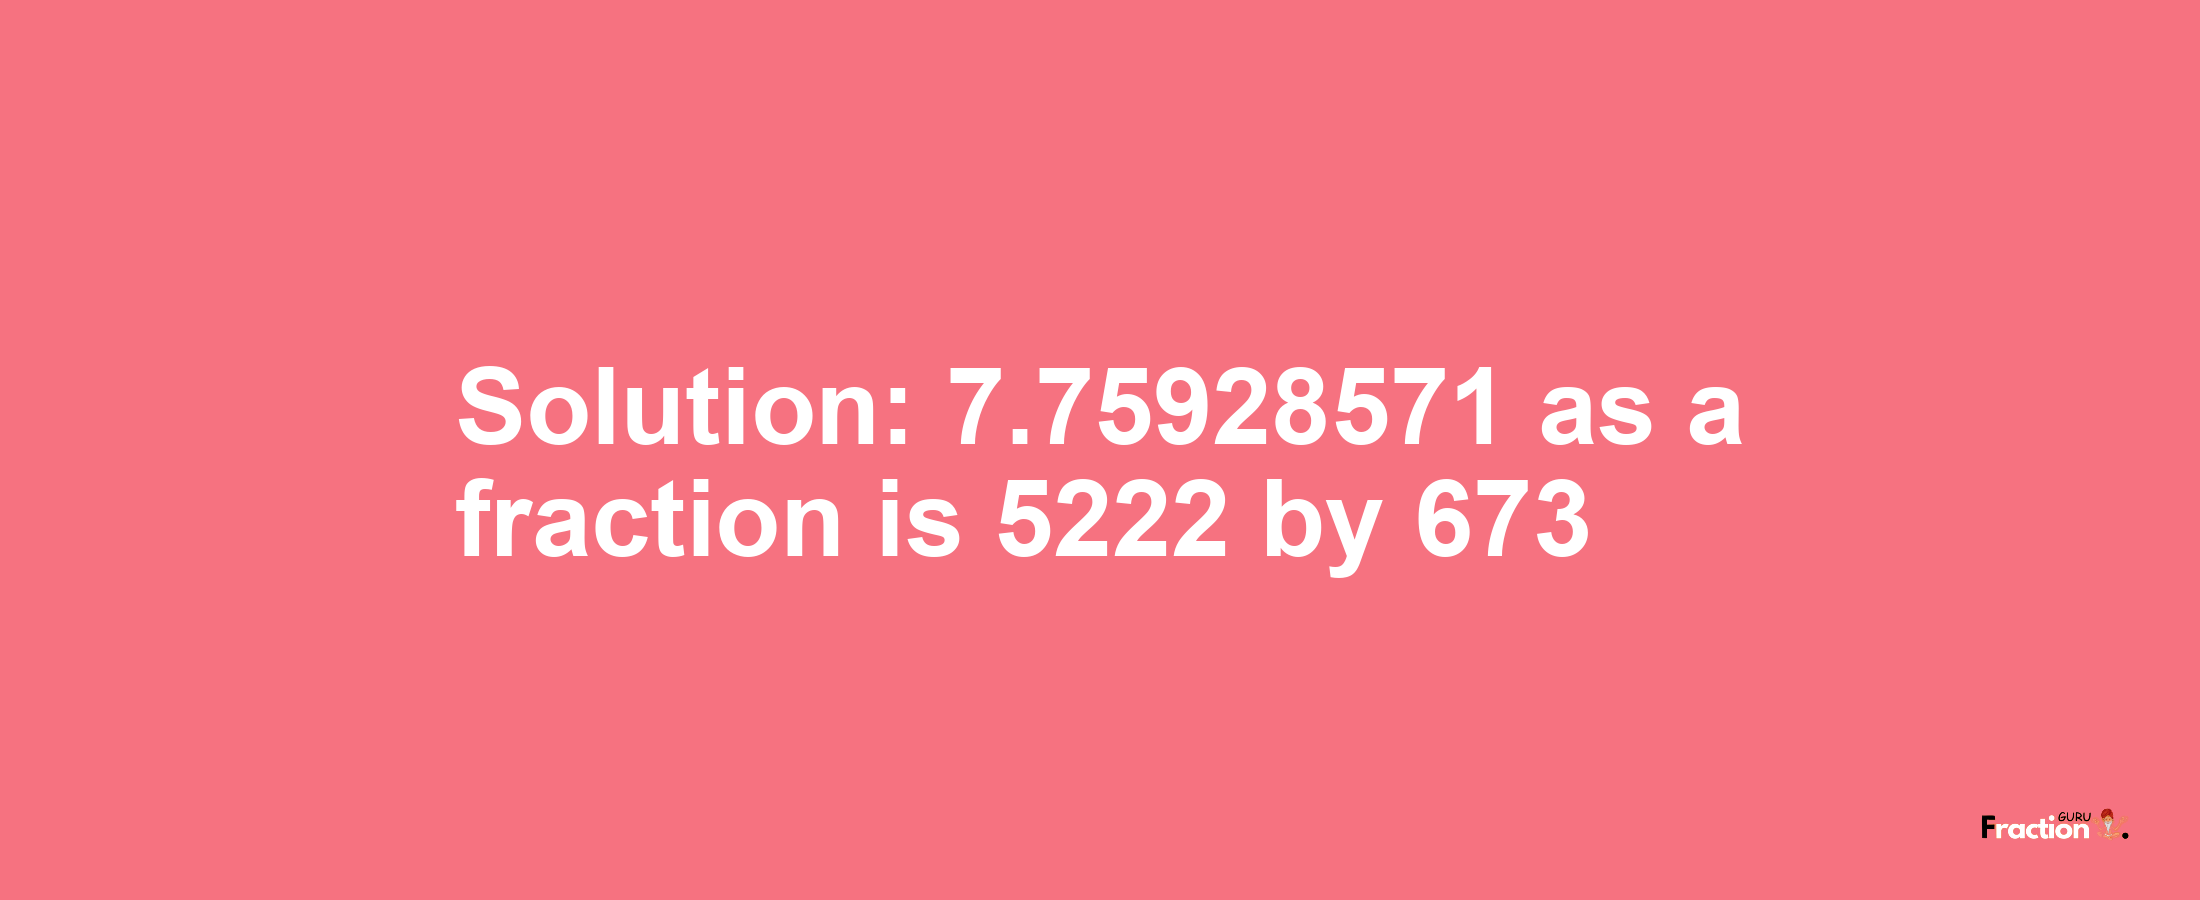 Solution:7.75928571 as a fraction is 5222/673